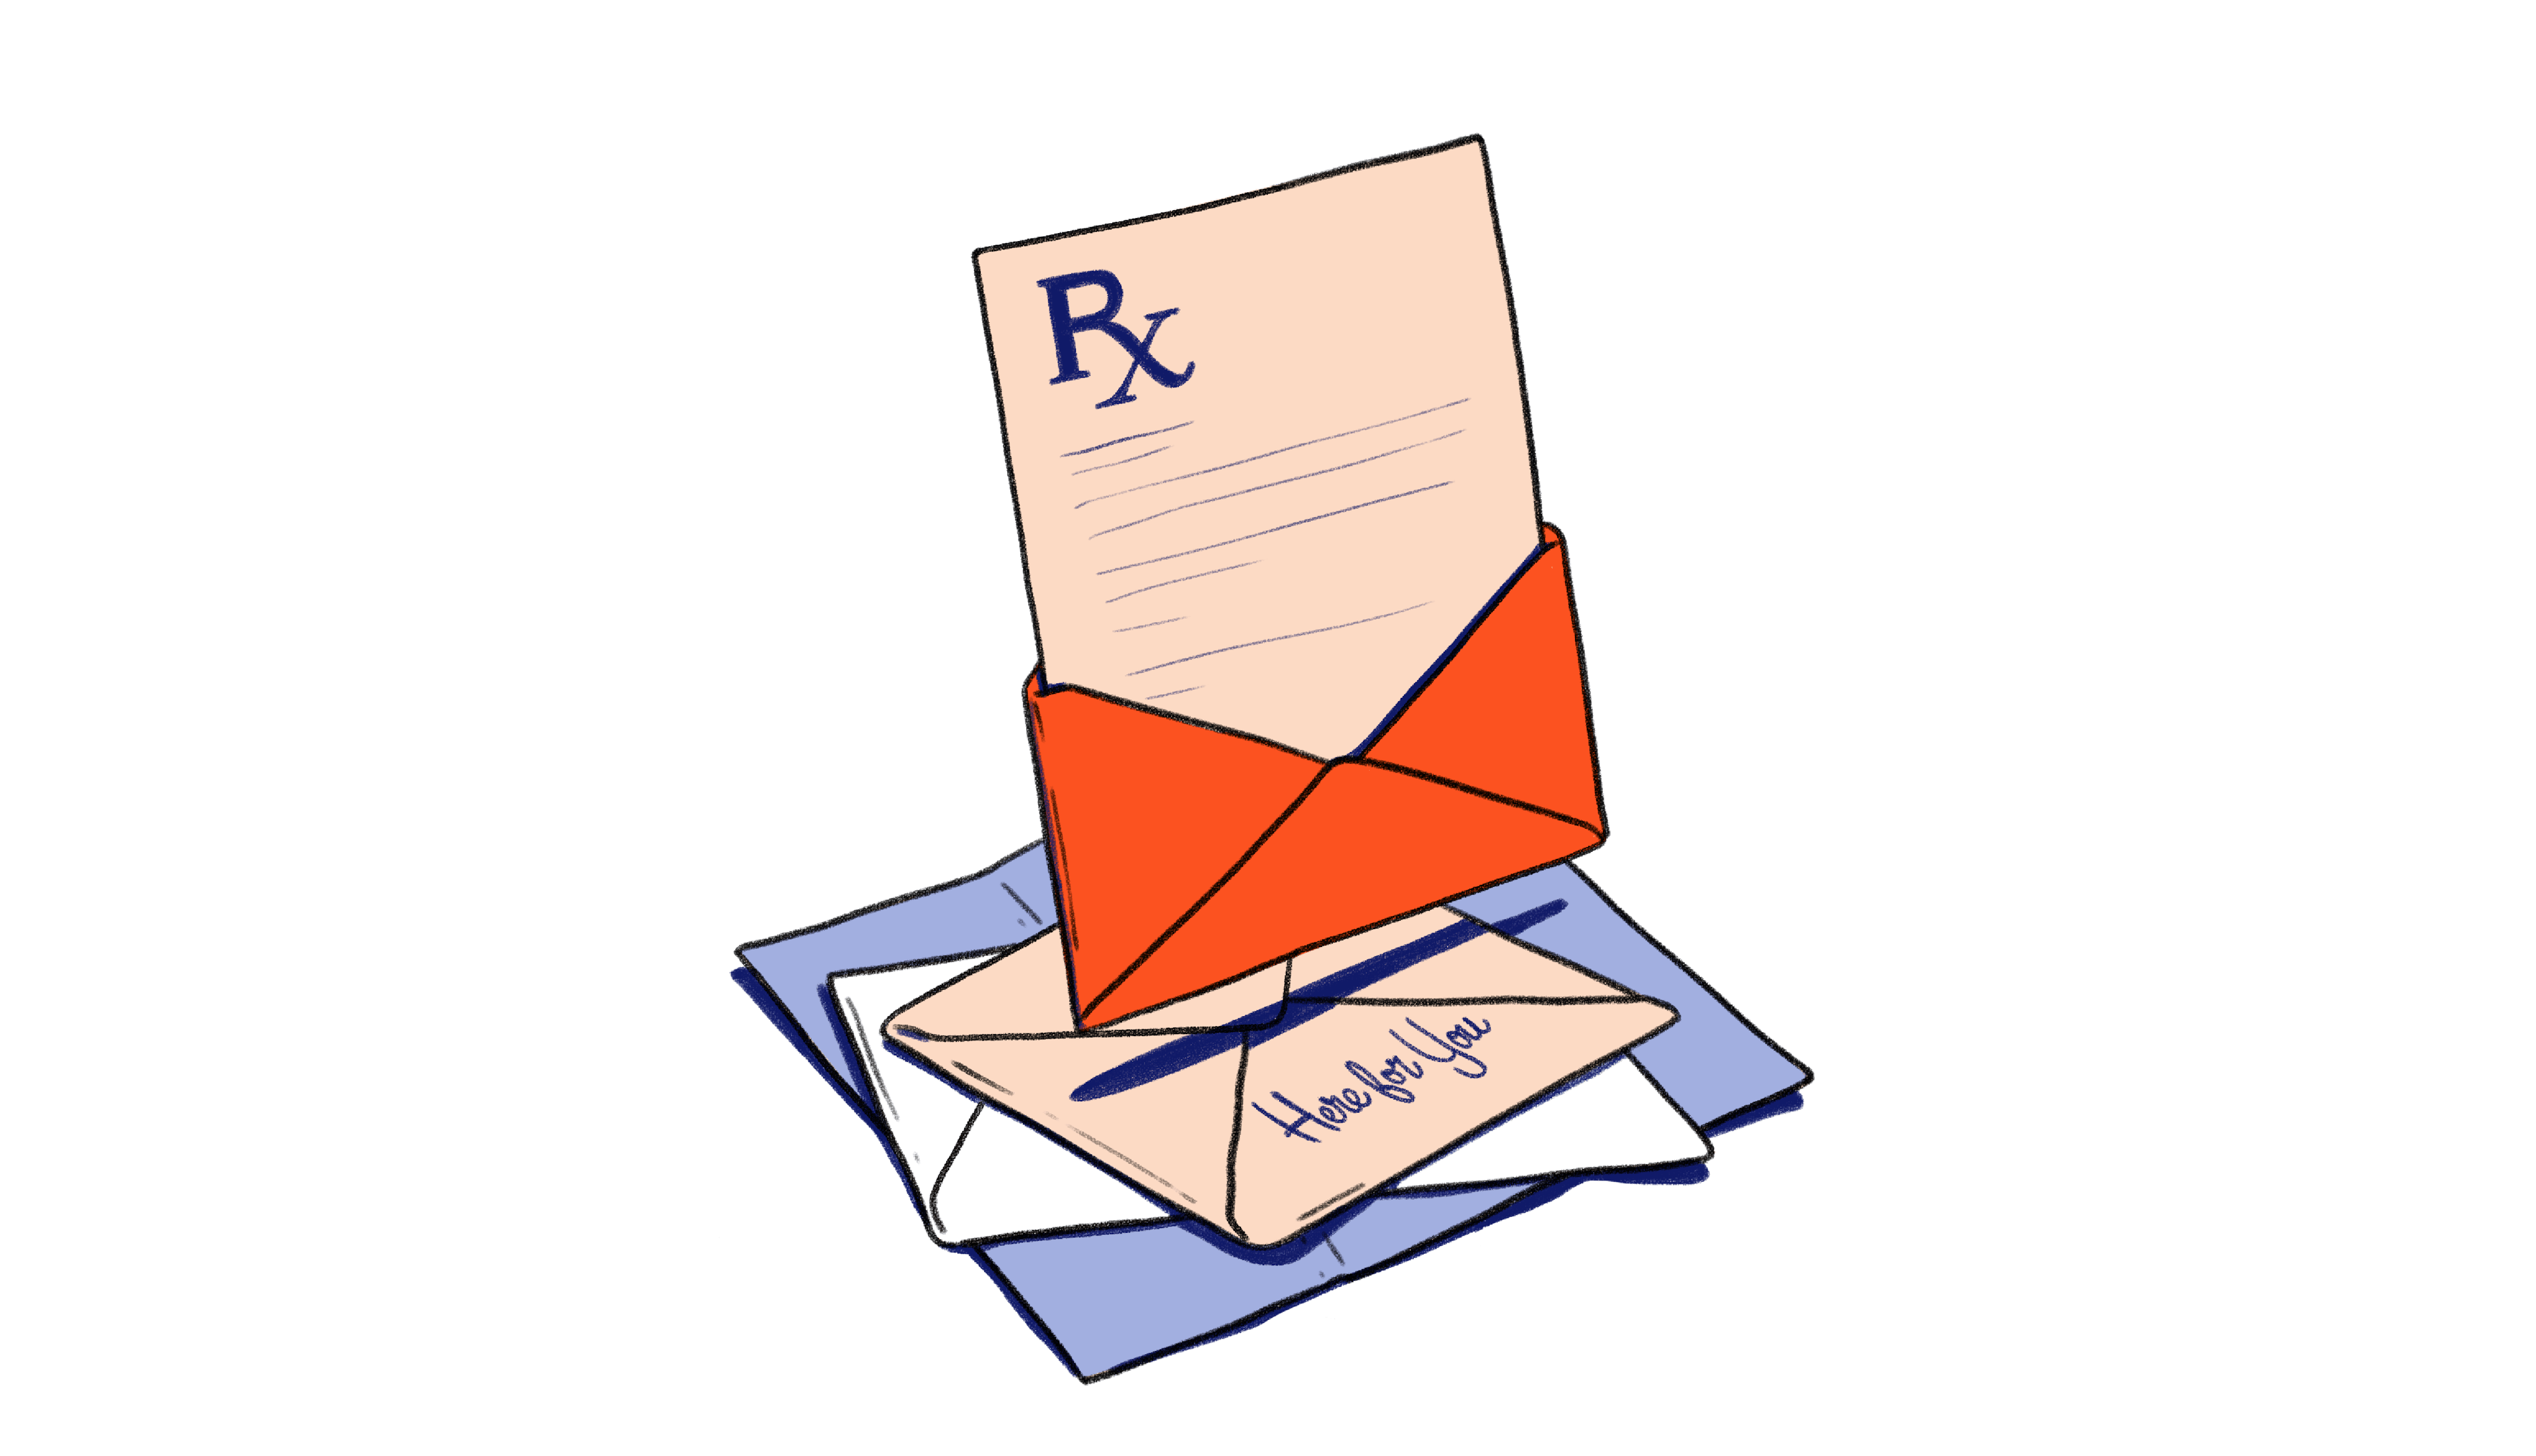 Envelopes with RX written on them